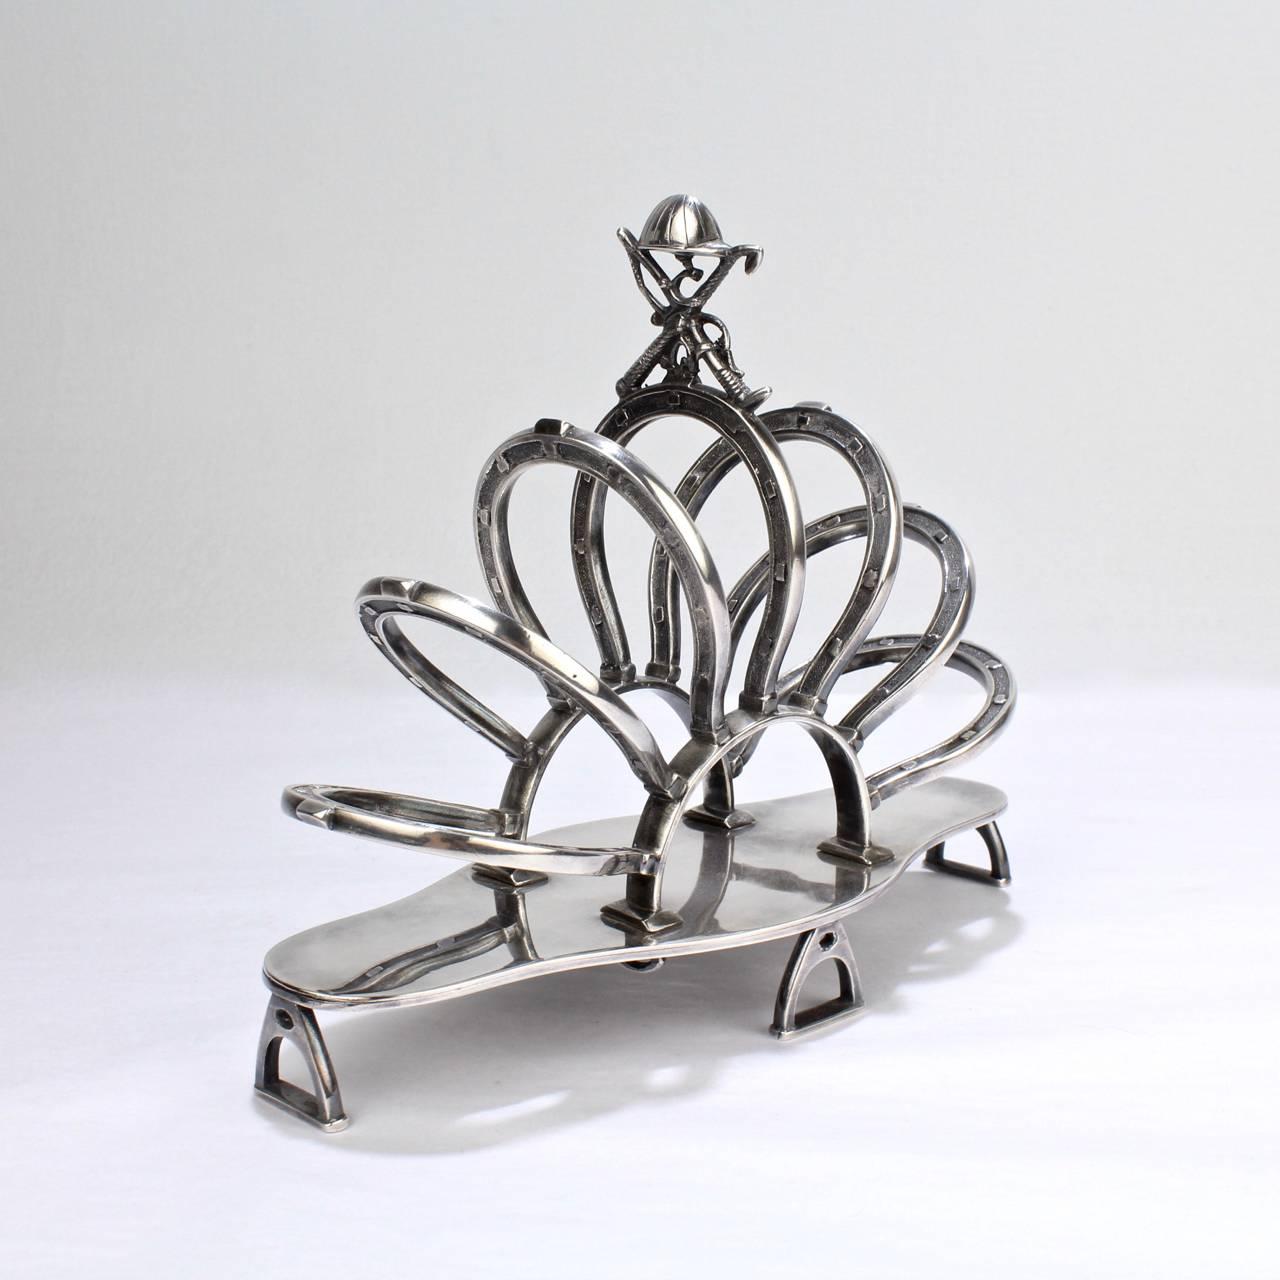 Late Victorian Antique English Equestrian Silver Plated Toast or Letter Rack with Horseshoes